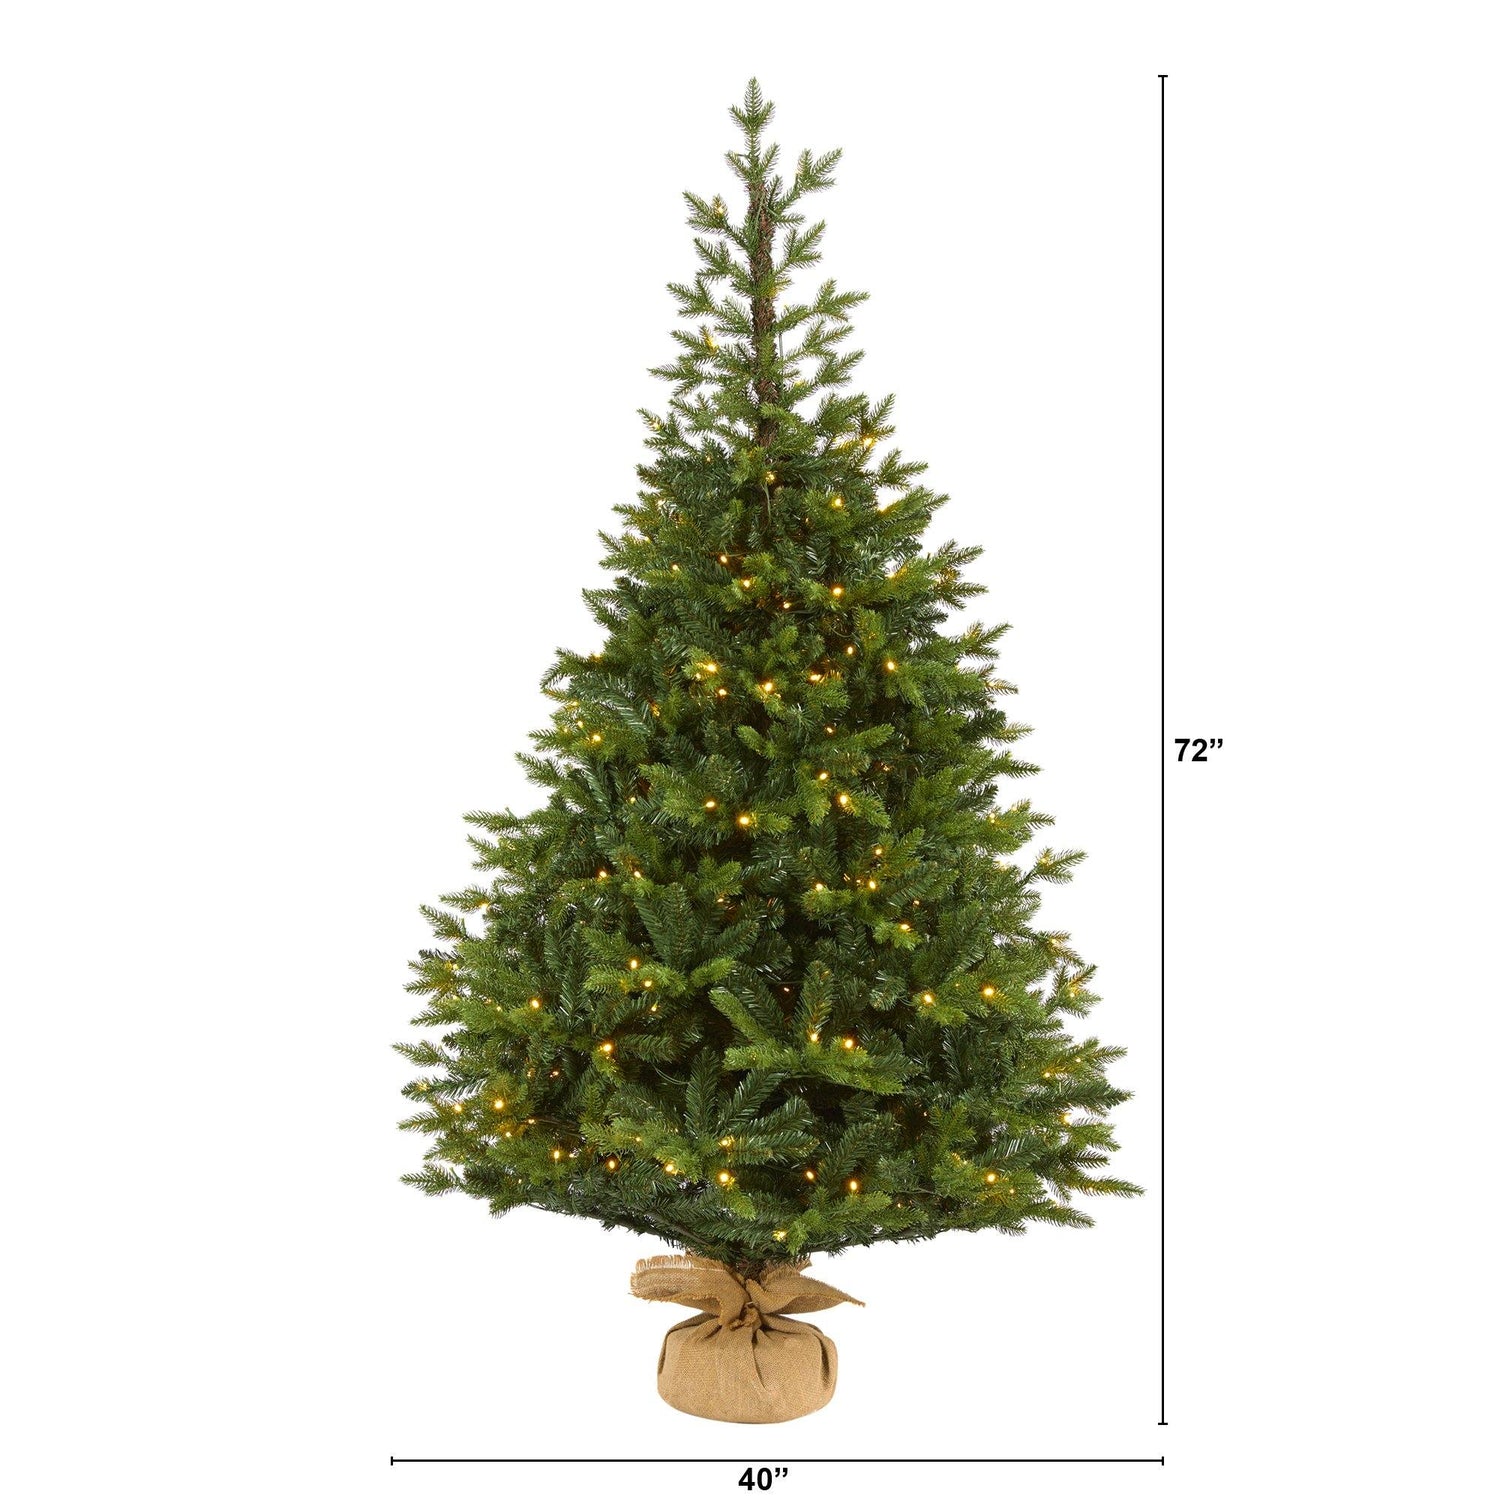 6’ Fraser Fir “Natural Look” Artificial Christmas Tree with 300 Clear LED Lights, a Burlap Base and 2113 Bendable Branches